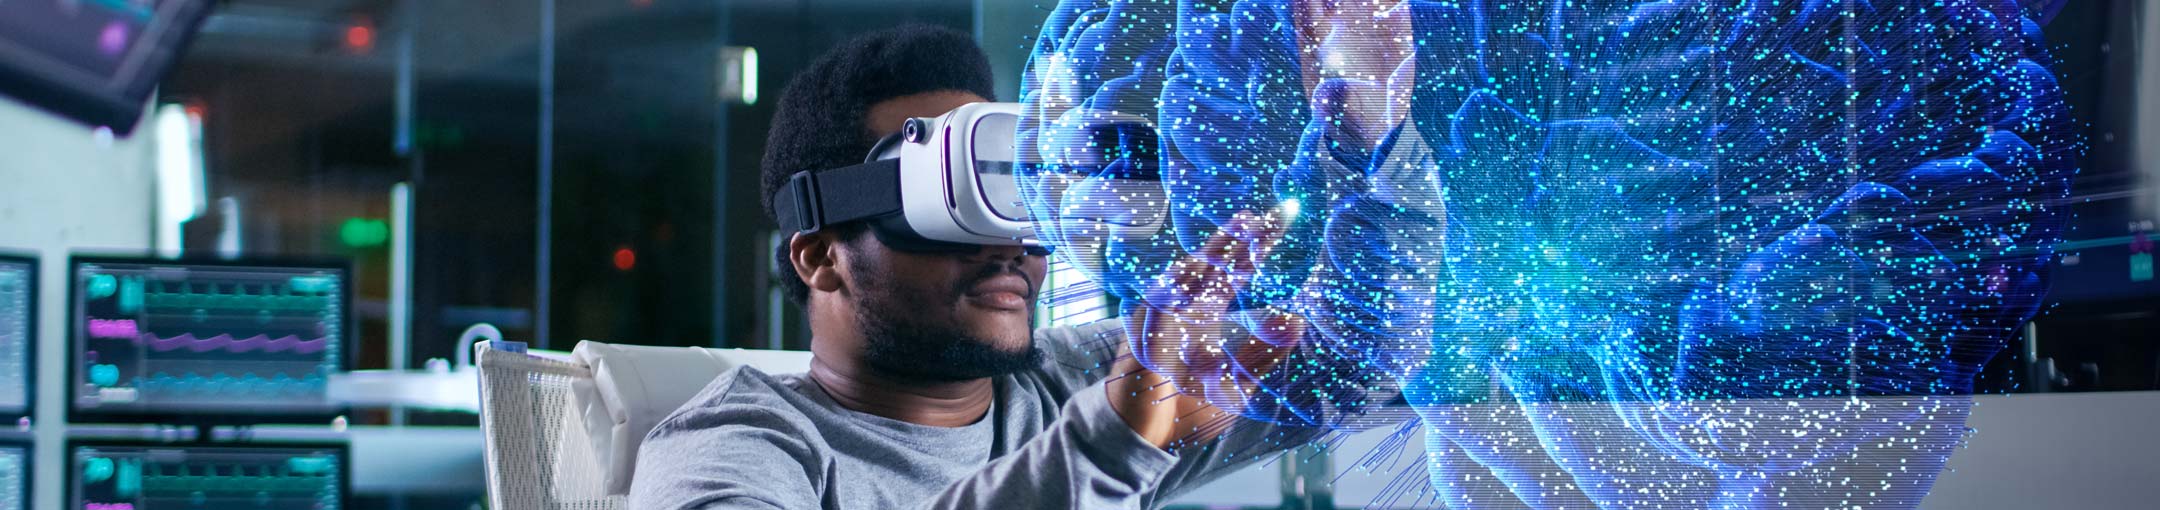 Student uses VR goggles and appears to be looking at a blue, 3D brain.